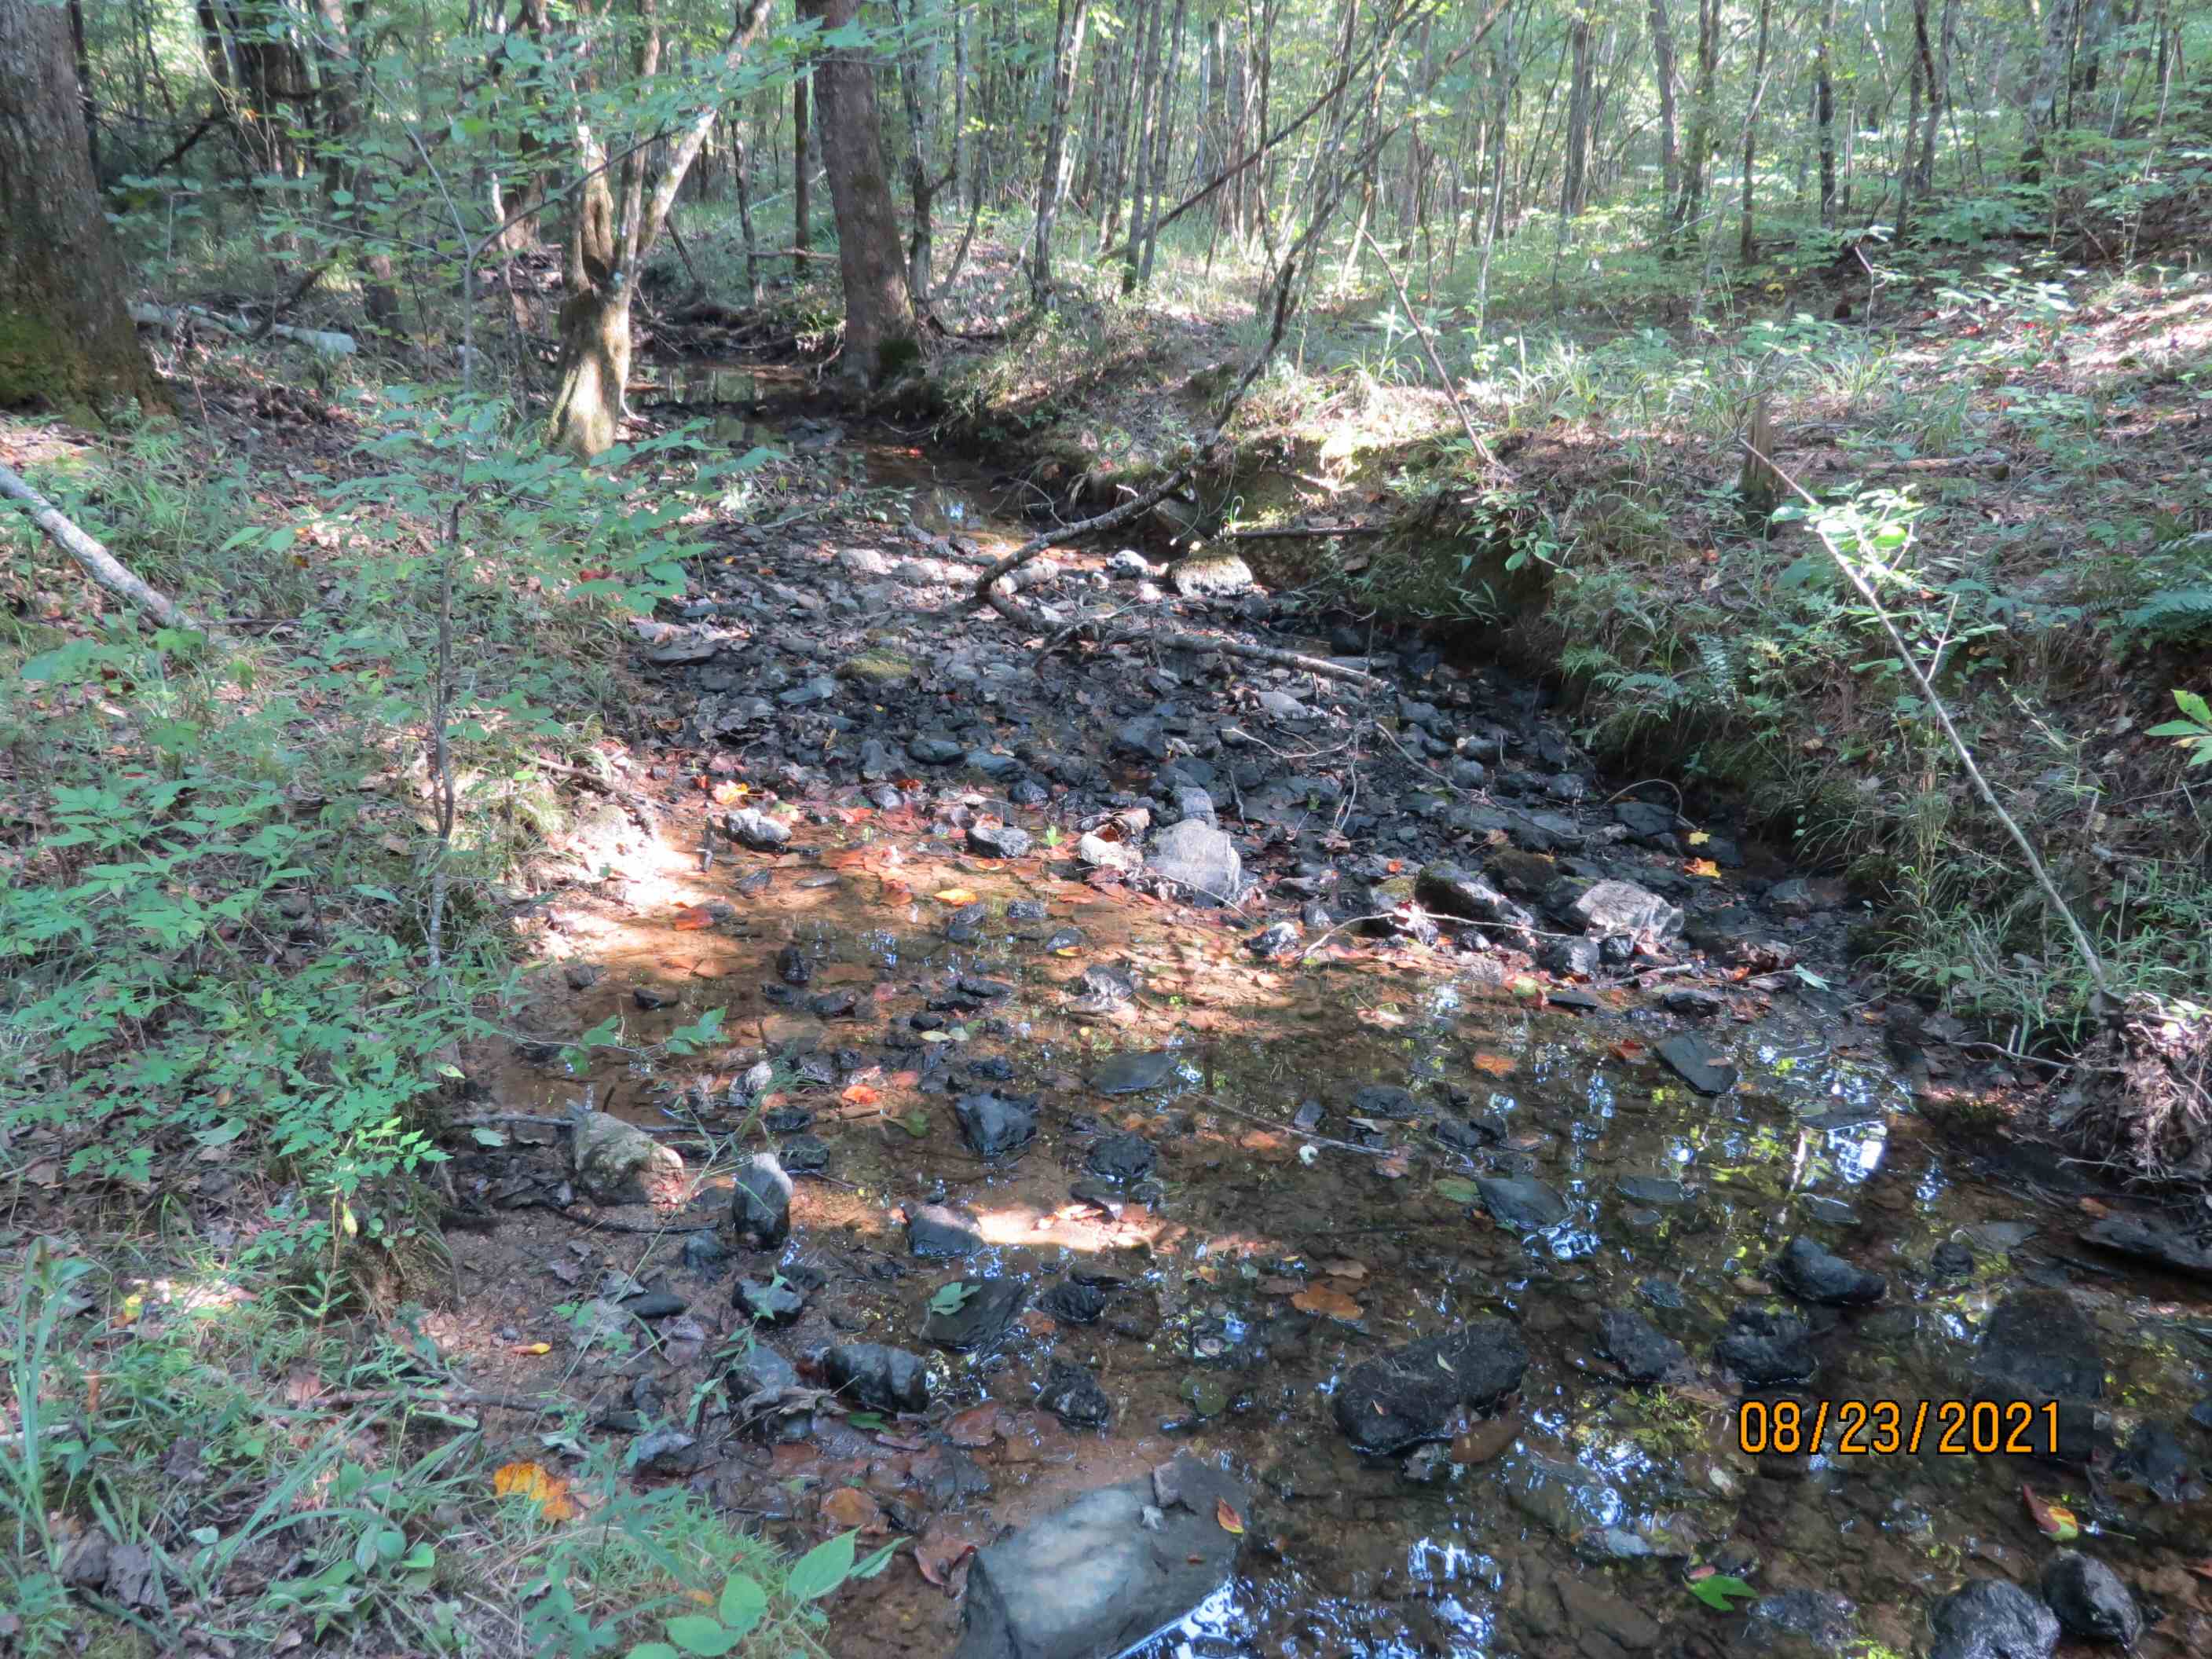 One of several un-named creeks that cross the property